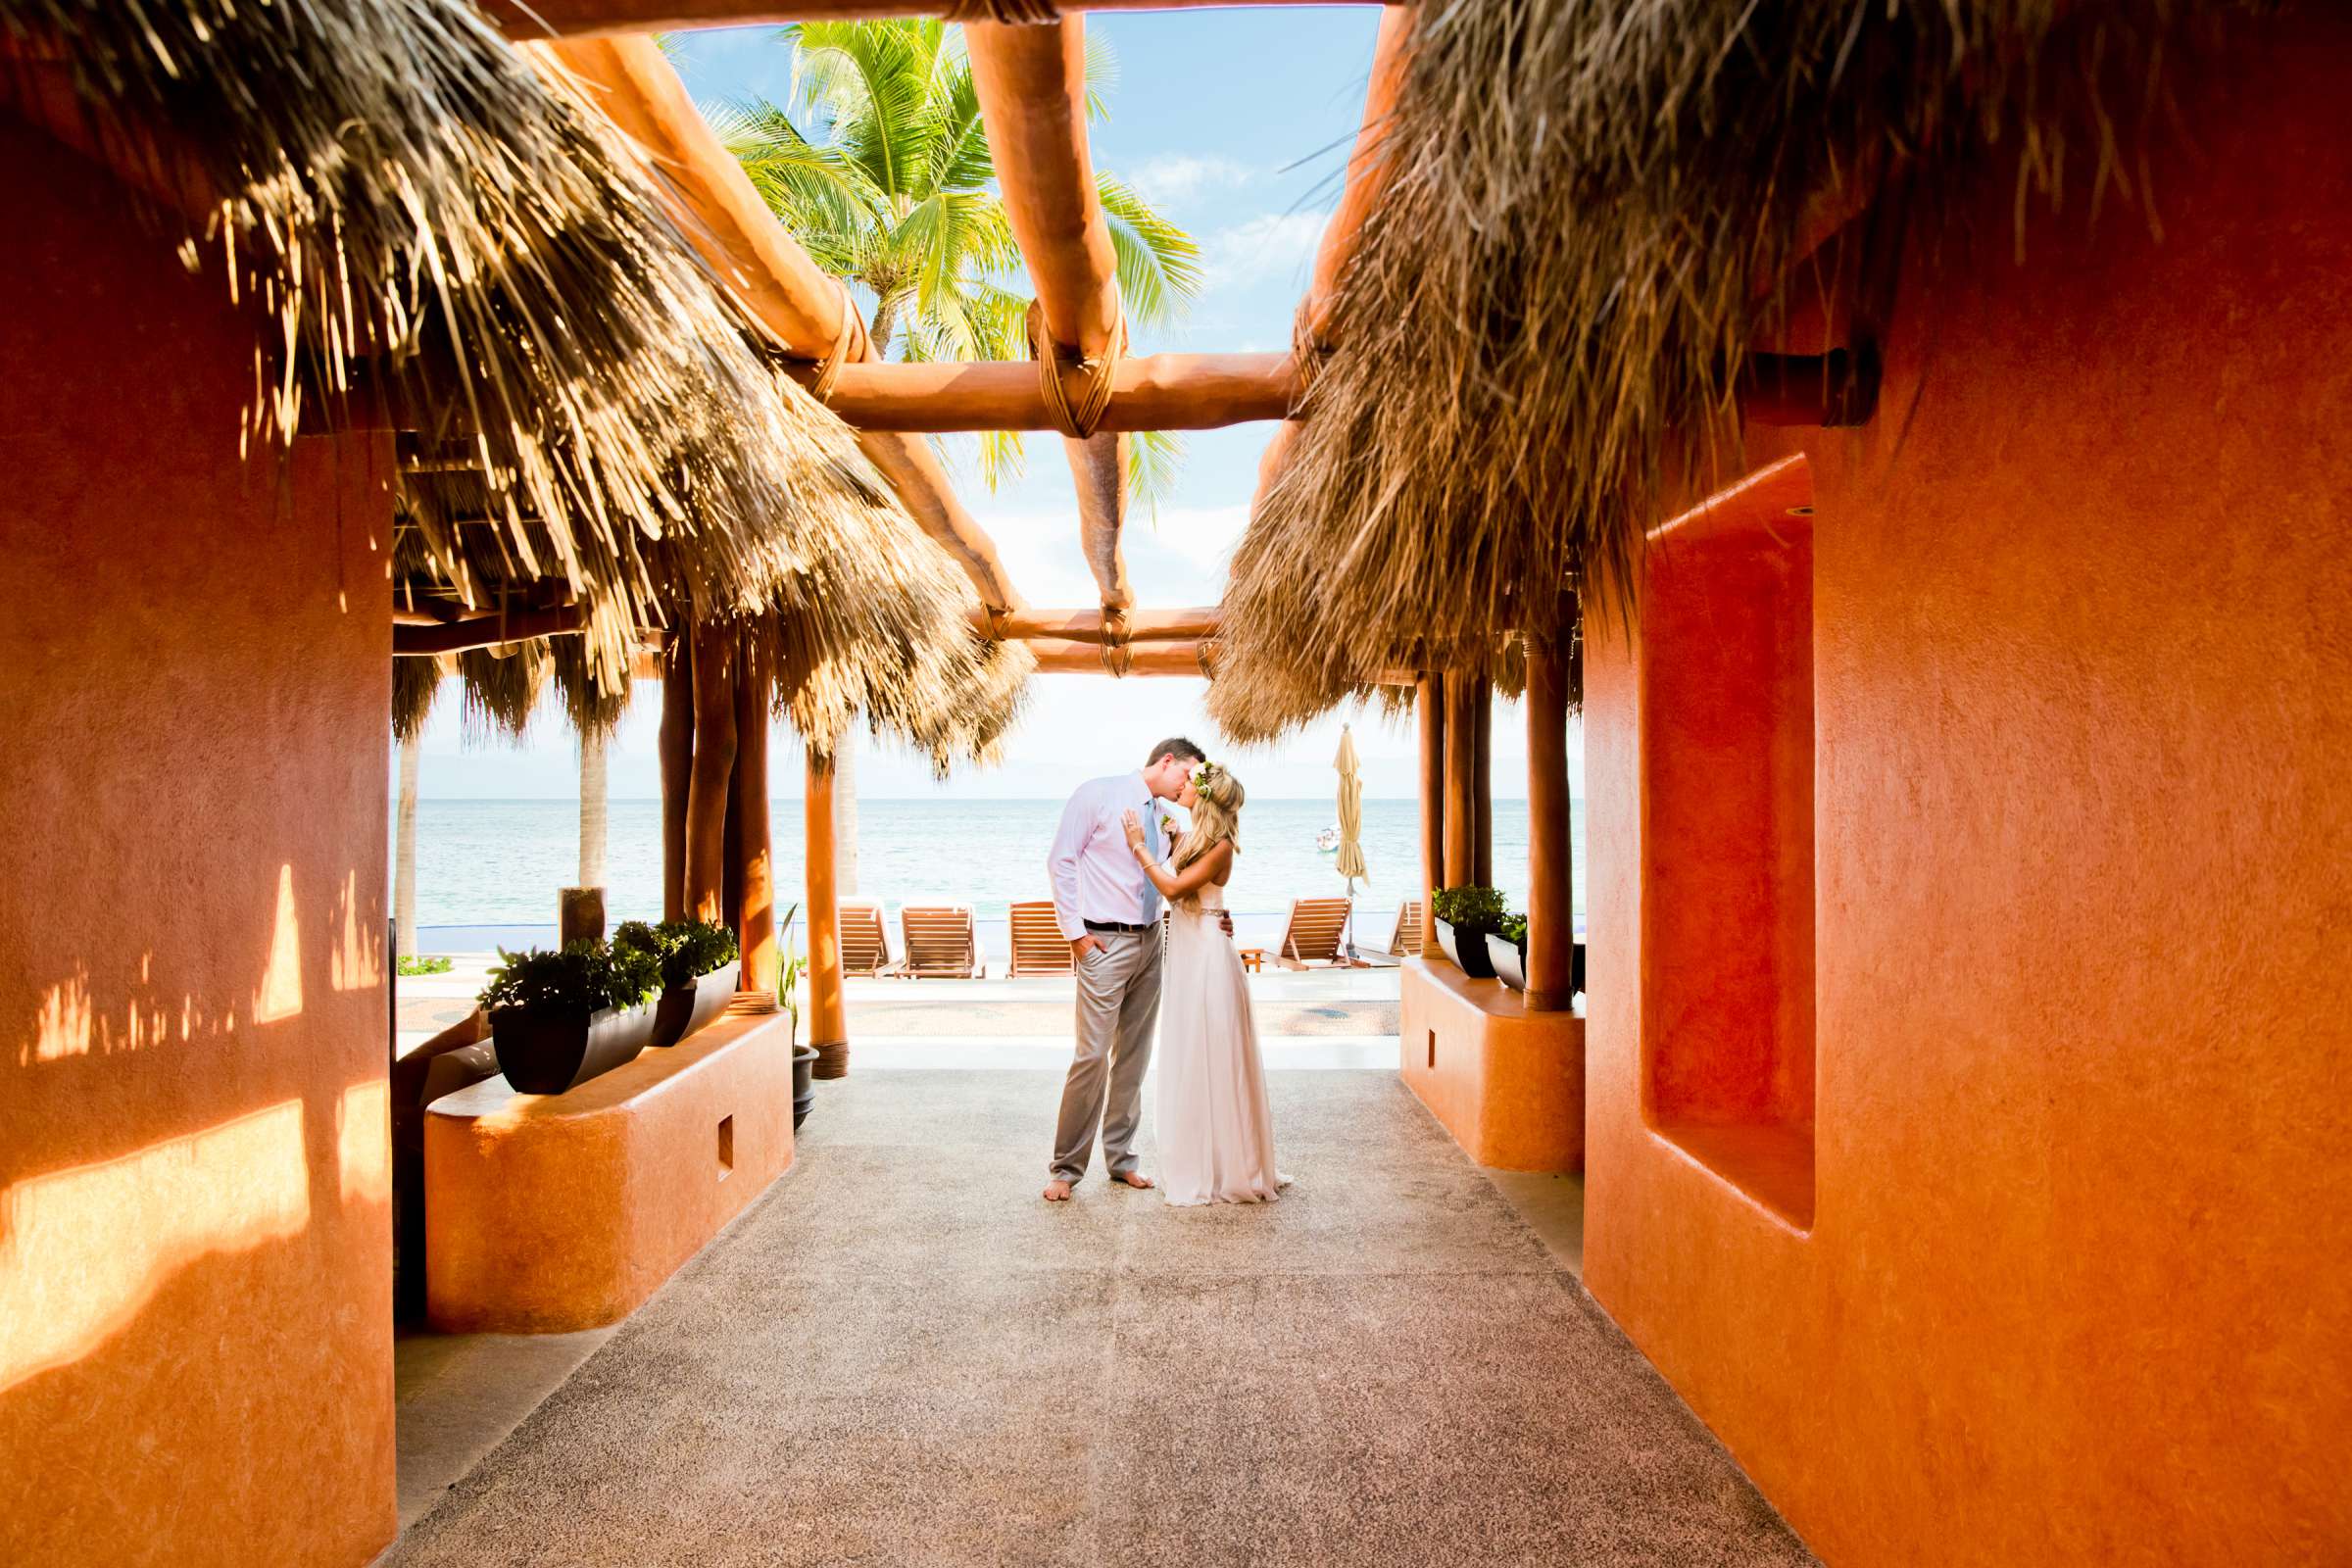 Orange colors, Beach, Tropical, Bride and Groom at Exclusive Resorts Punta Mita Wedding, Natalie and Dustin Wedding Photo #2 by True Photography